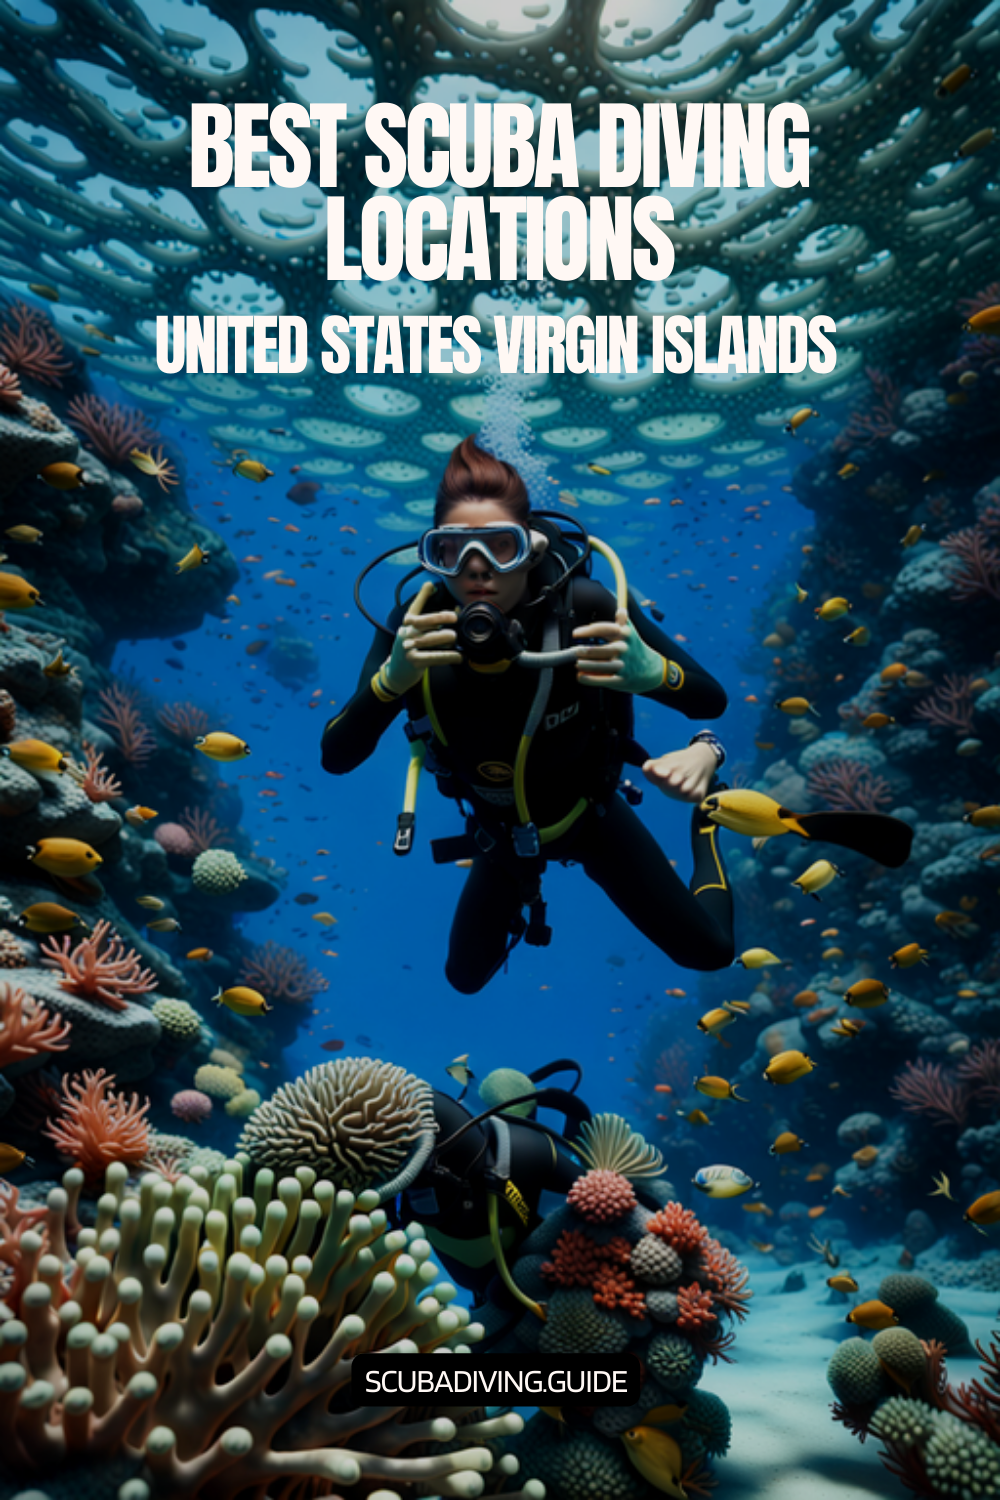 Scuba Diving Locations in The United States Virgin Islands